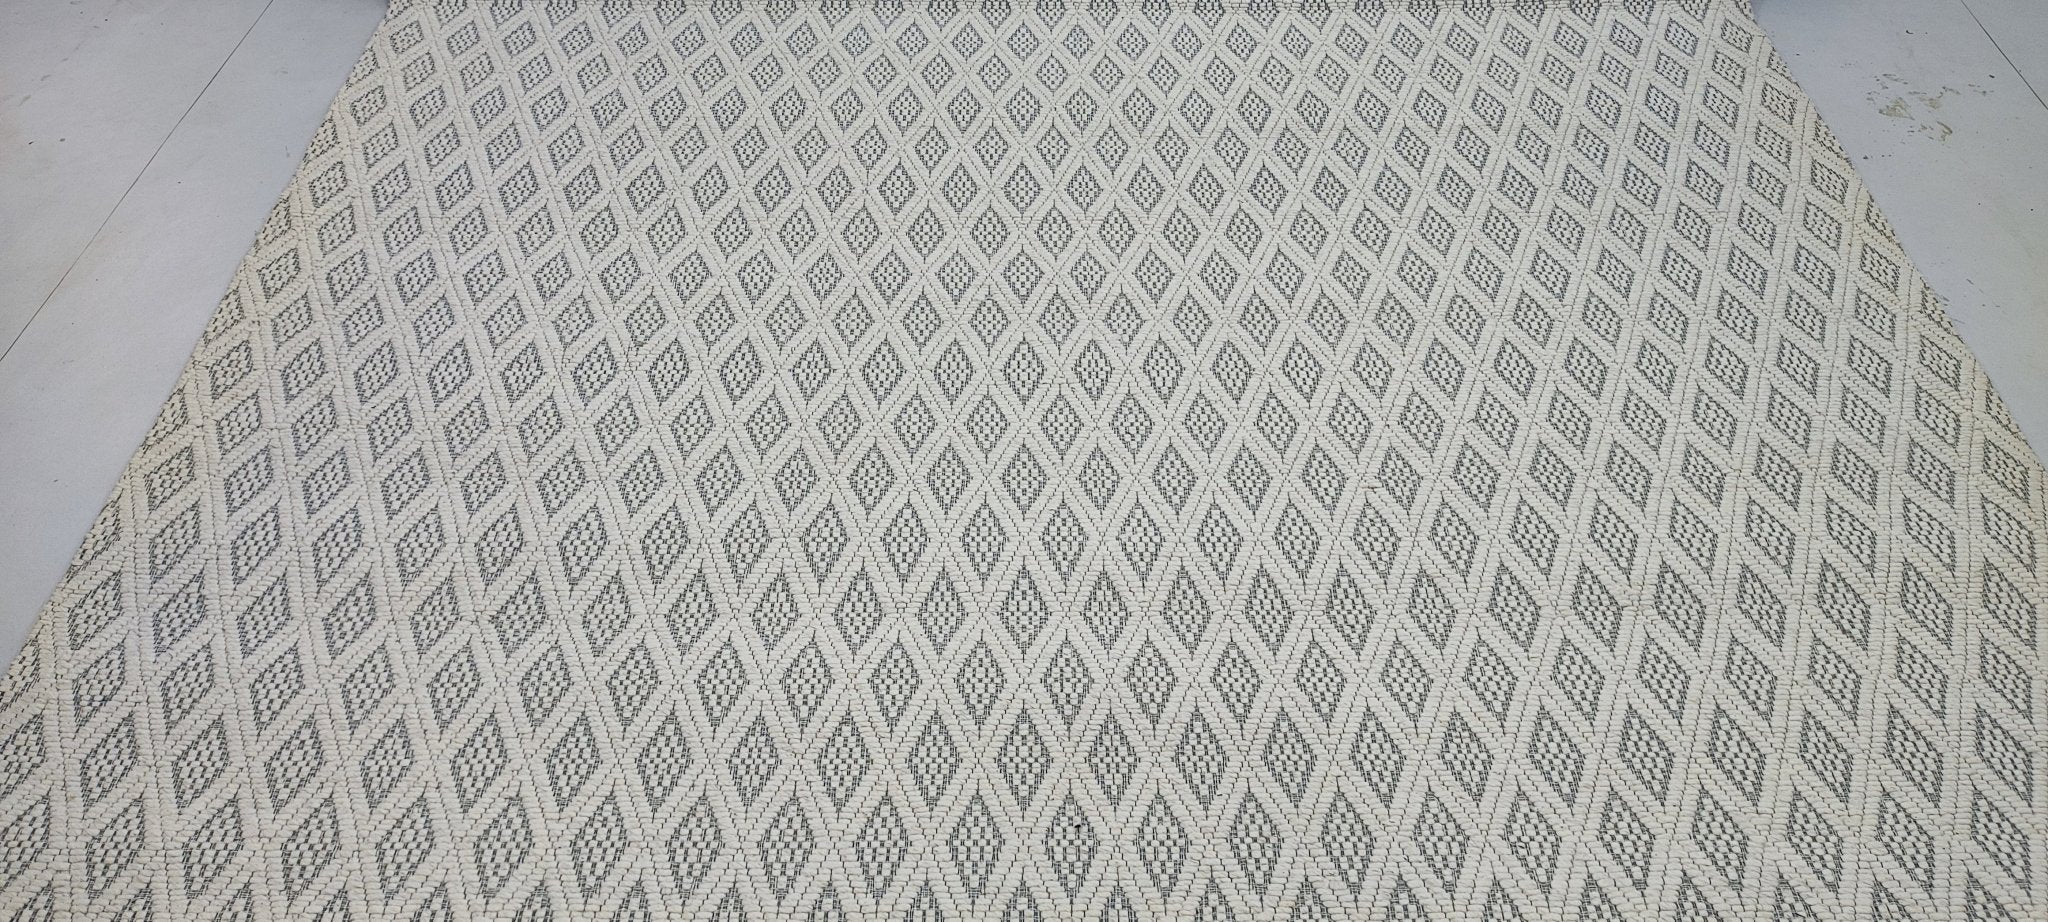 Cameron Tucker 7.9x10 Handwoven Ivory & Grey Jacquard Durrie | Banana Manor Rug Factory Outlet